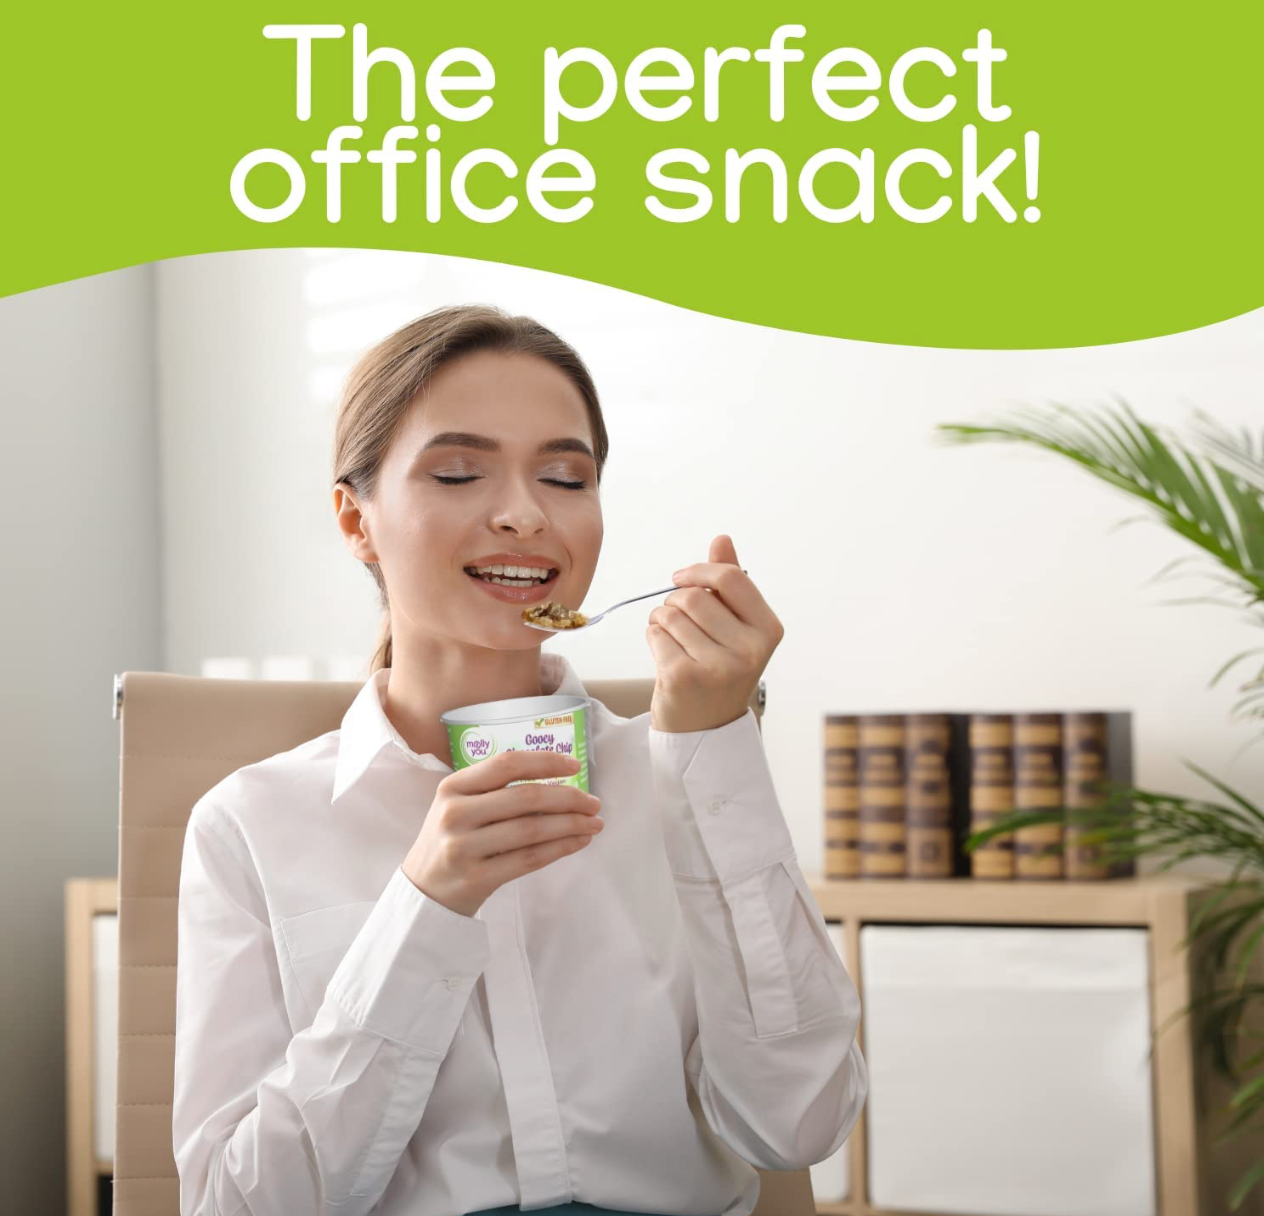 The perfect office snack!